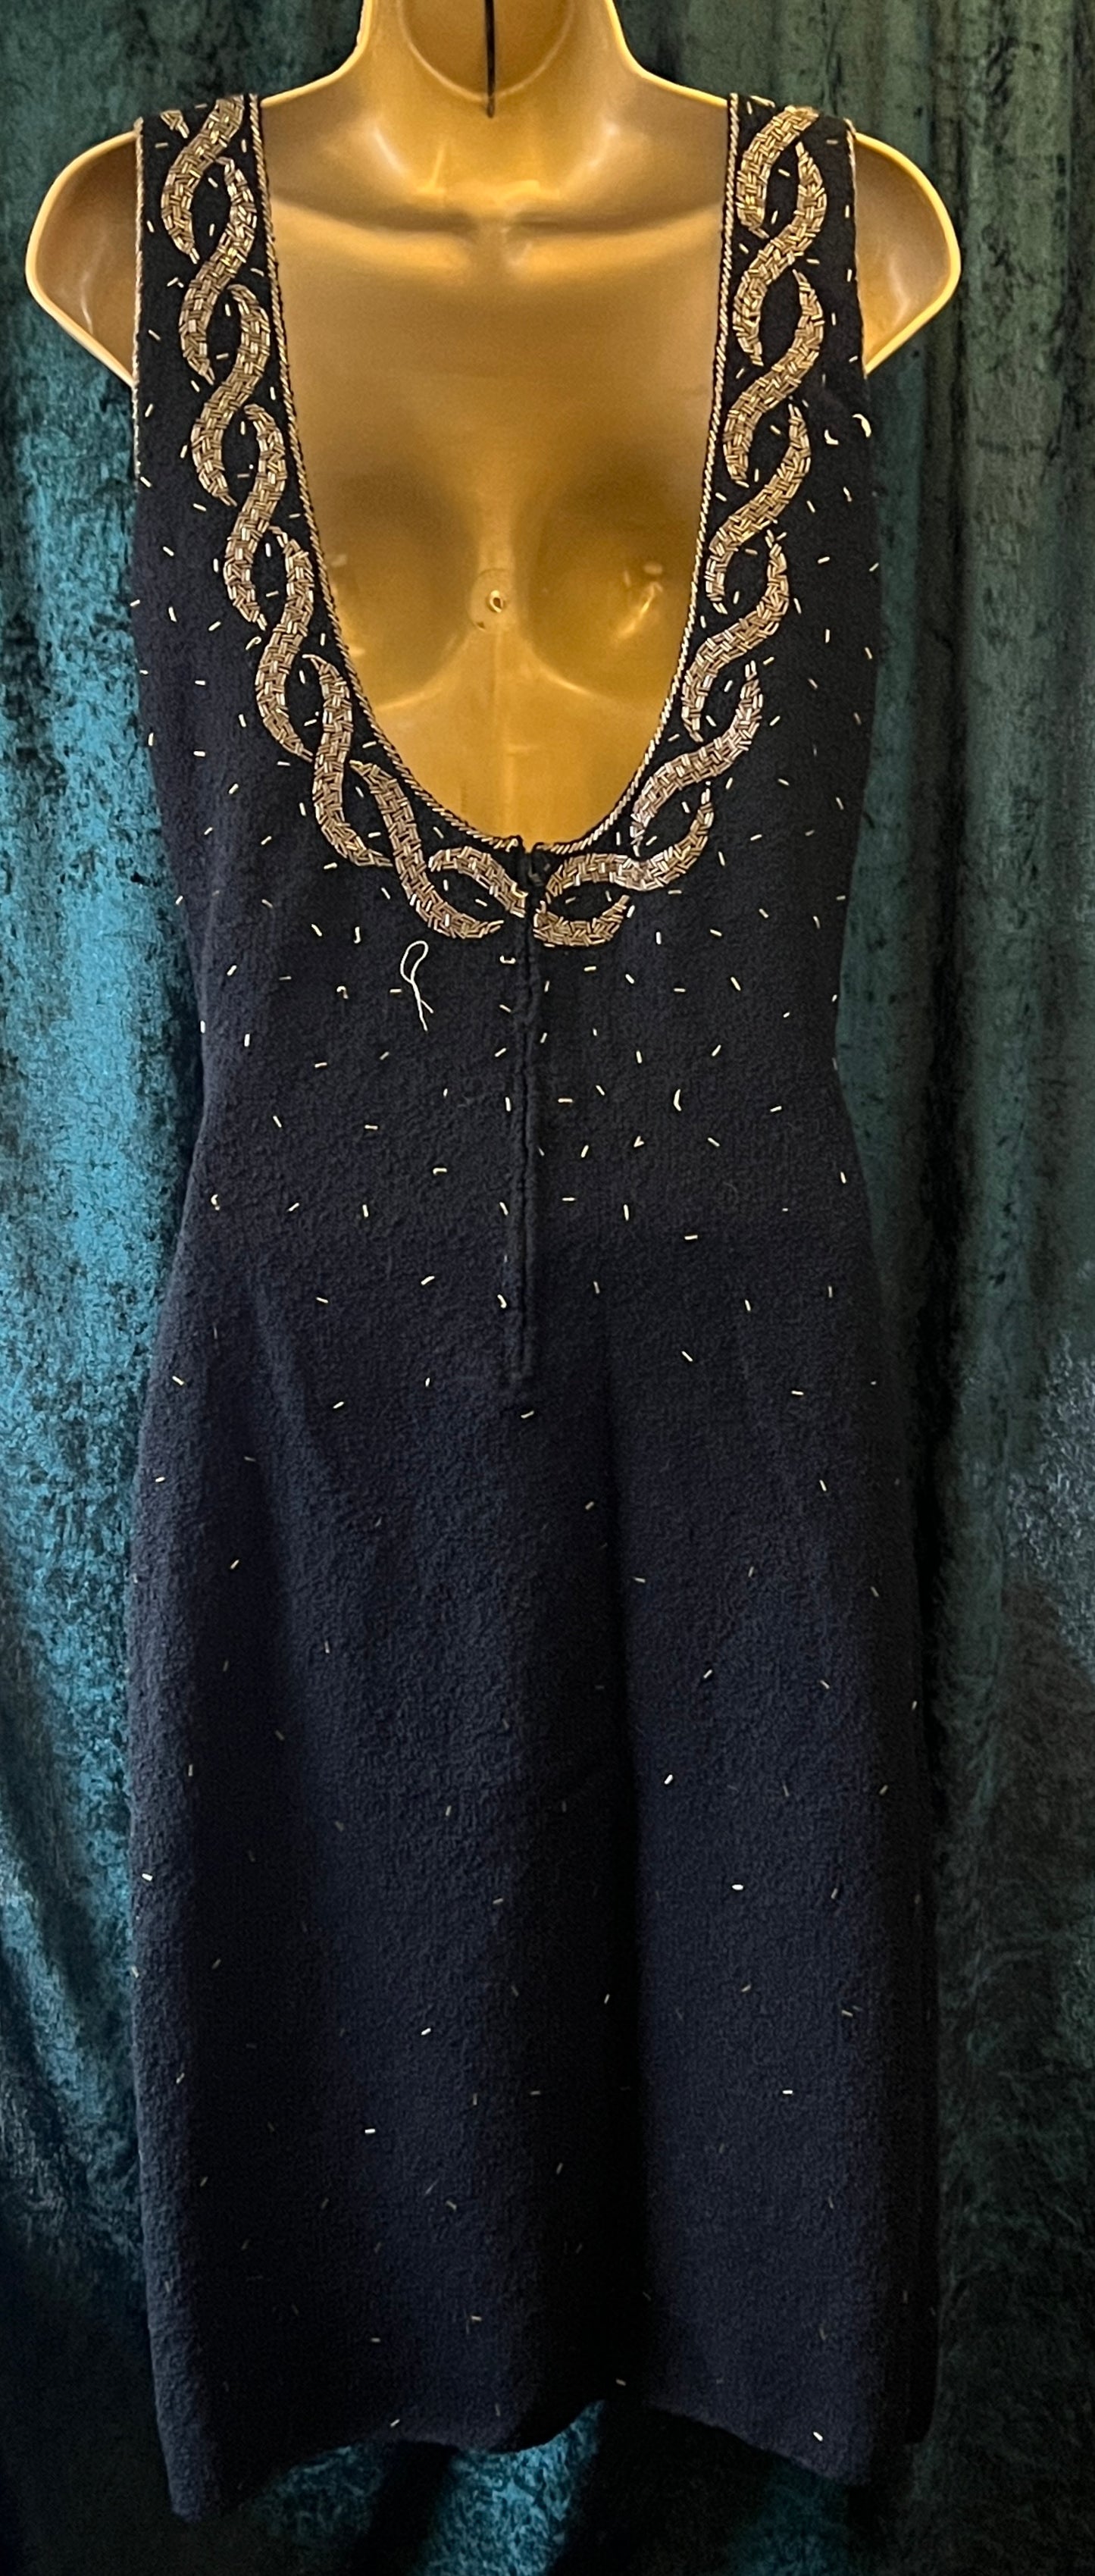 Vintage 50s Gene Shelley beaded black and gold knit wiggle cocktail dress